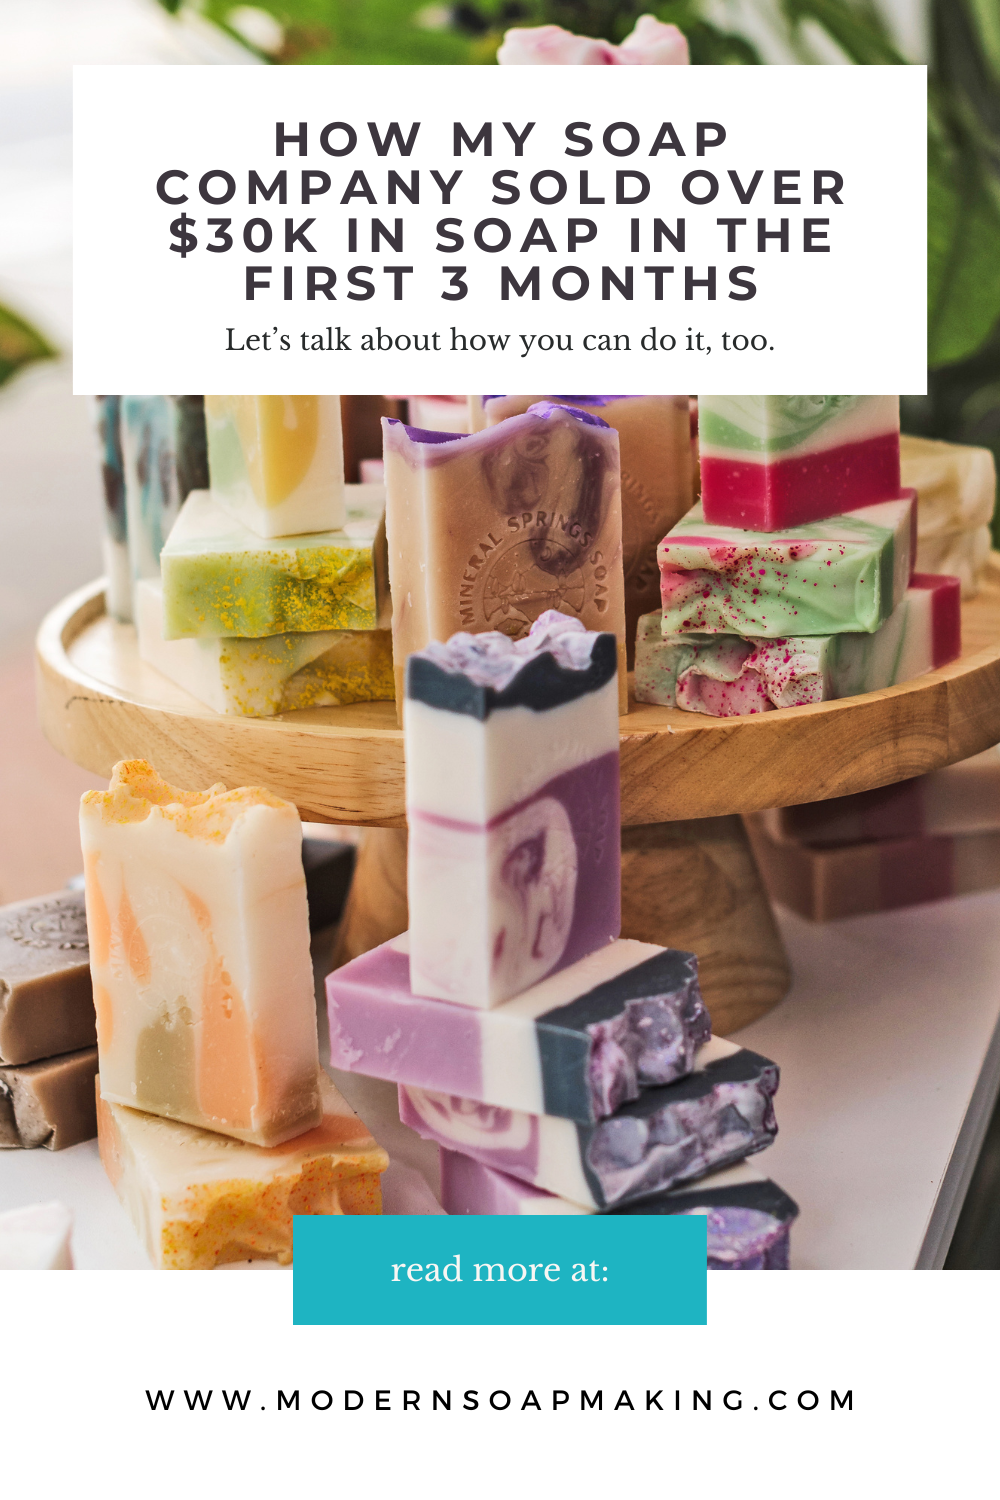 How My Soap Company Sold $30k in 3 Months